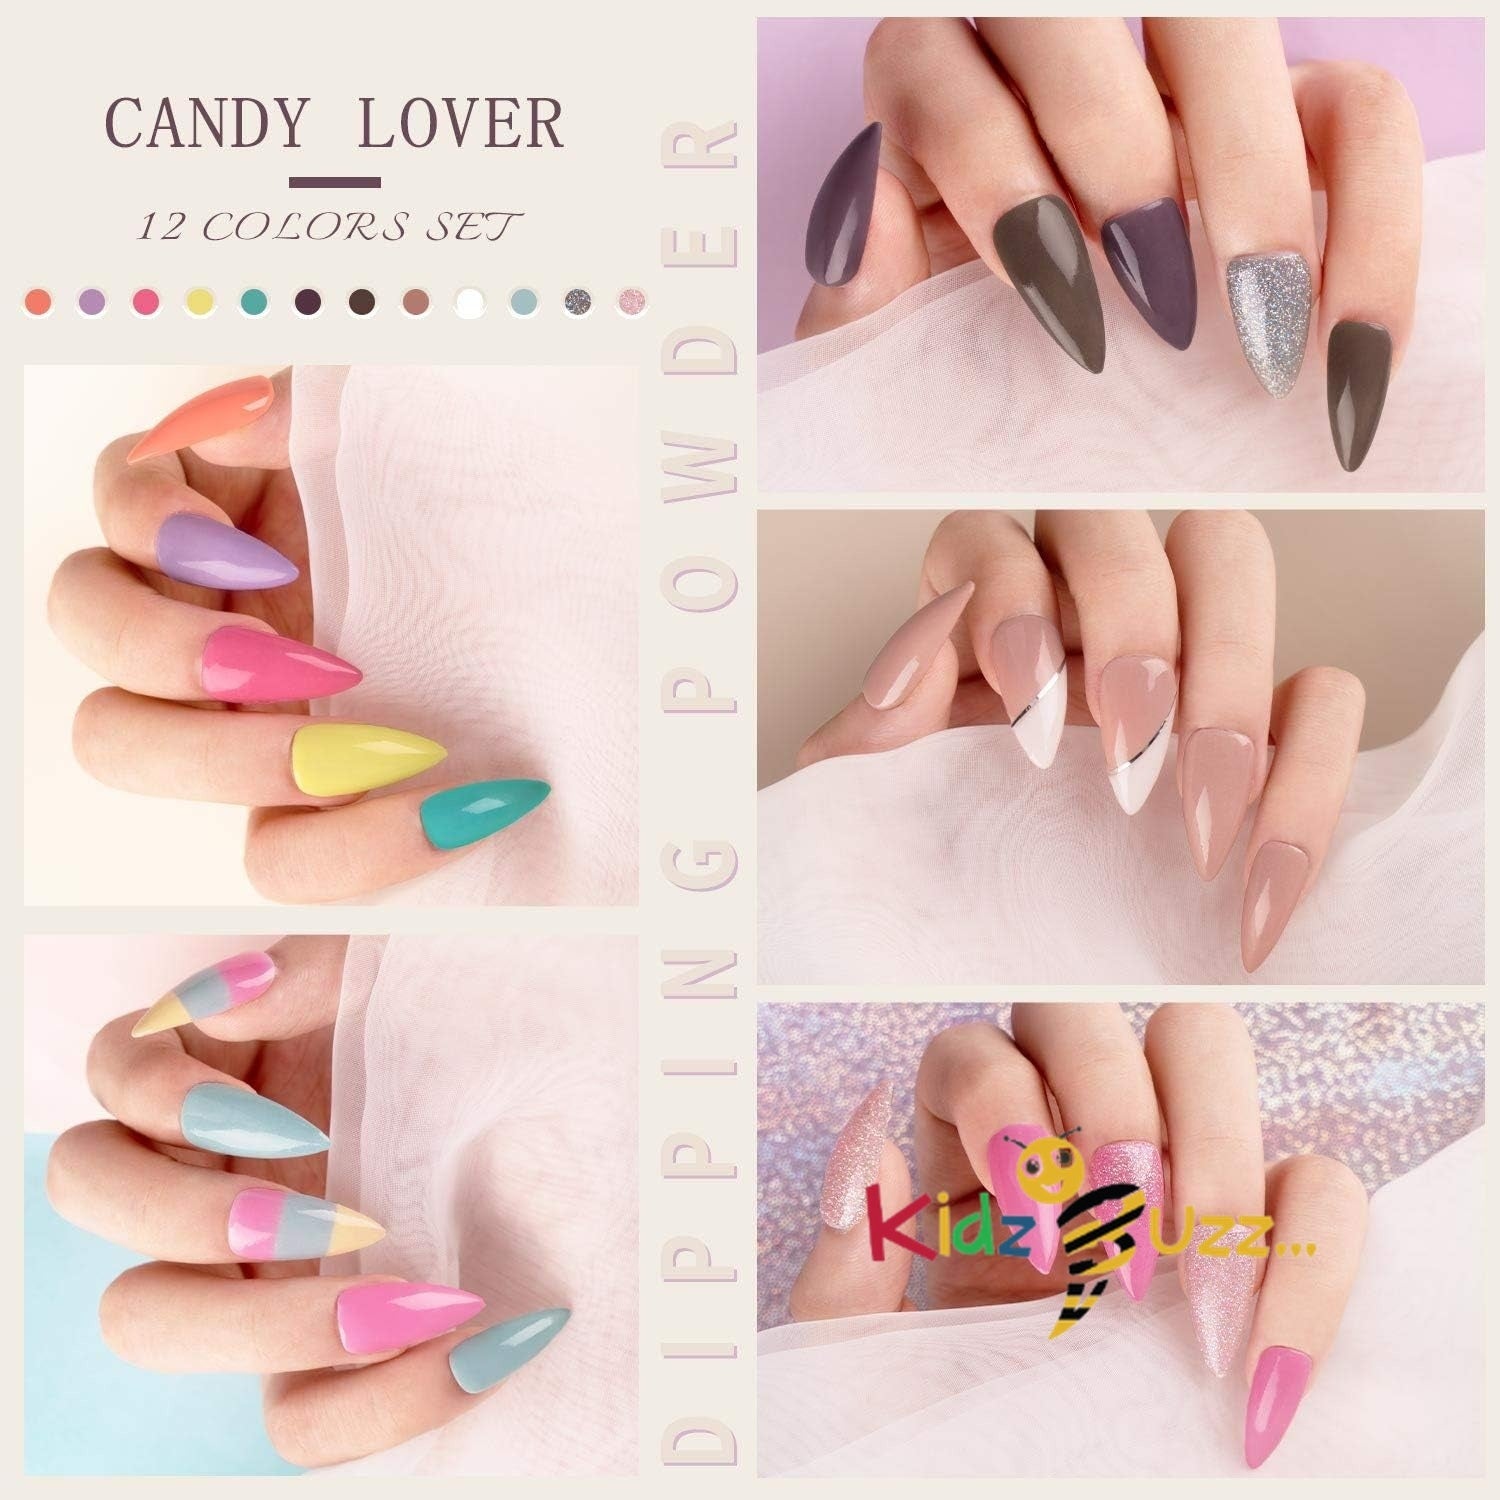 Dipping Powder Nail Gel Kit - Candy Lover Dip Powder 12 Light Candy Pastel Nude Glitters